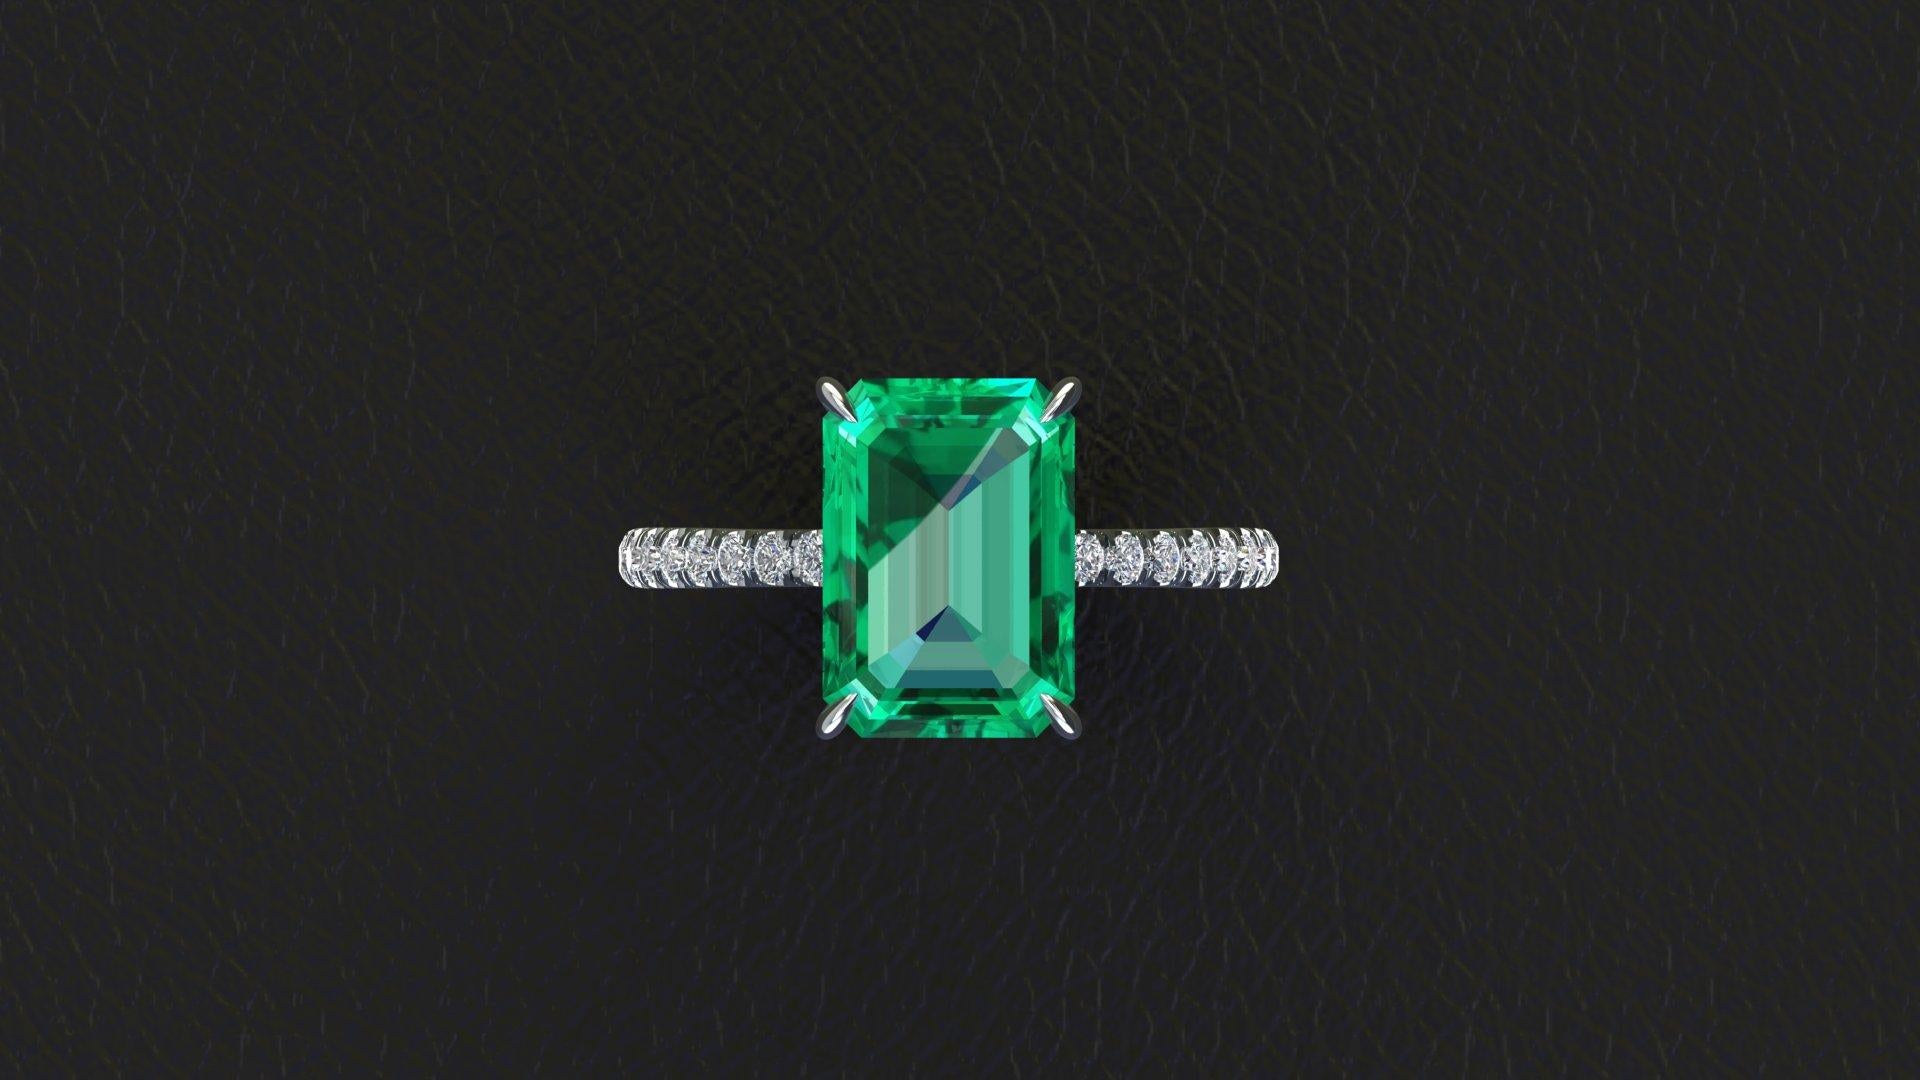 FERRUCCI GIA Certified 3.31 carat Emerald, very high quality color and transparency embellished by a pave' of bright diamonds of approximately  total carat weight of 0.32 carat, set in a hand crafted Platinum 950 ring, manufactured with the best